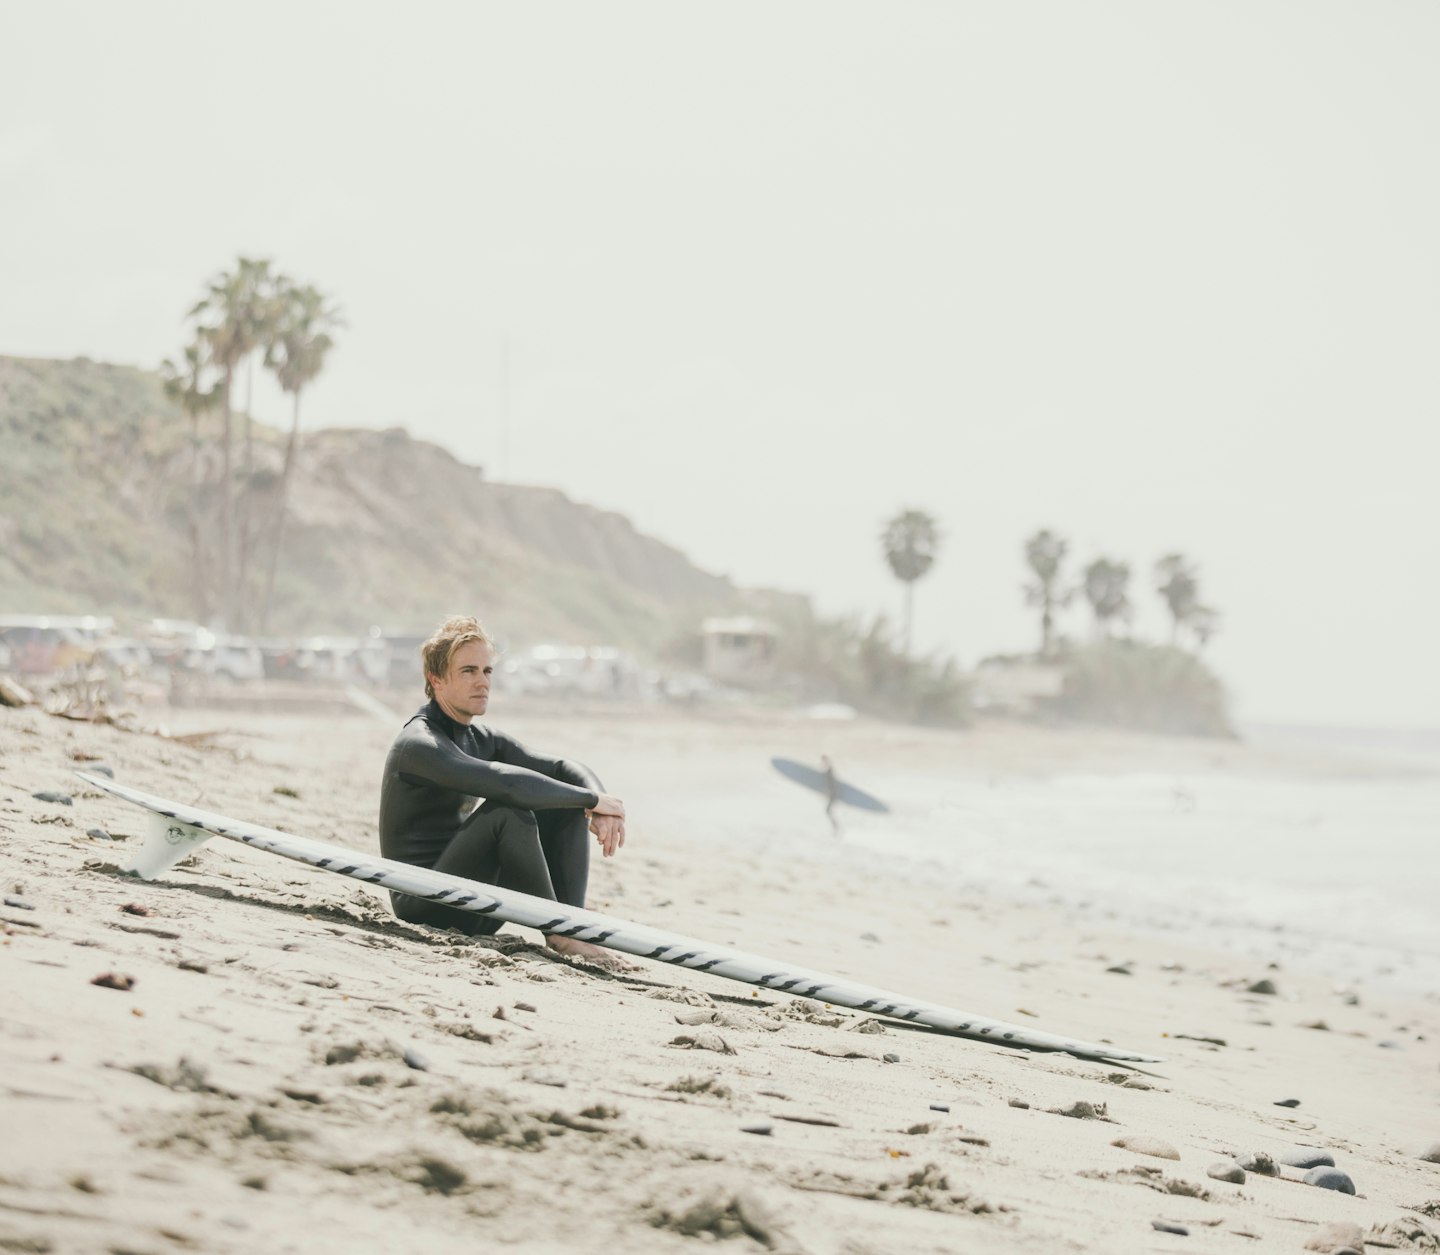 A man sitting on the beach next to his surfboard, looking into the distance.